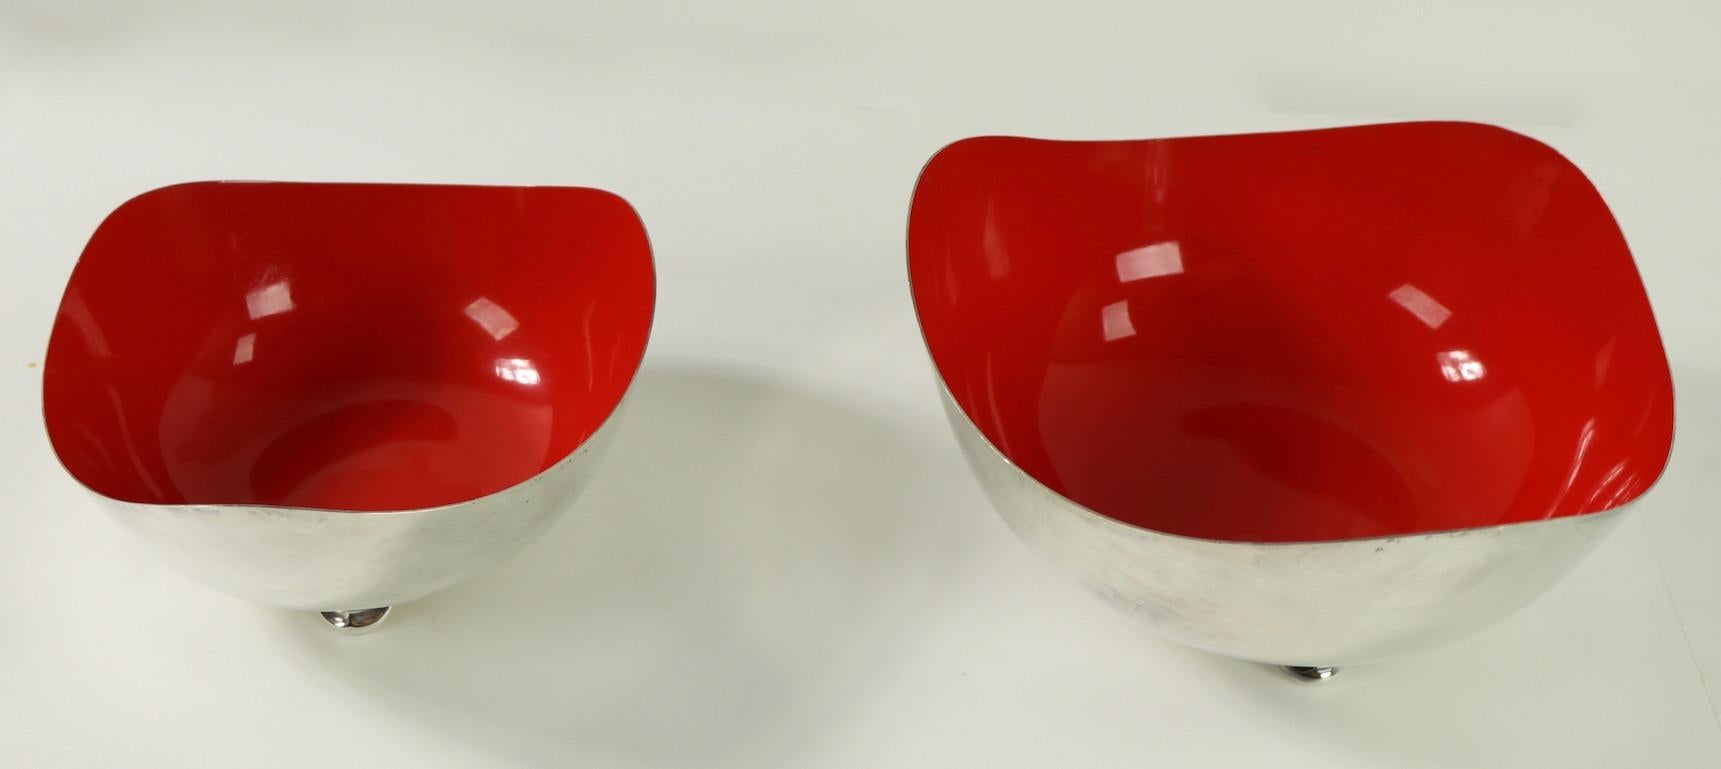 Two freeform midcentury silver pate bowls with lipstick red enamel interior. Both are signed on the bottom, both are in very fine original condition, matching form, one is larger 9.25 diameter x 4.75 smaller bowl 7.5 diameter x 3.5 inches. Offered